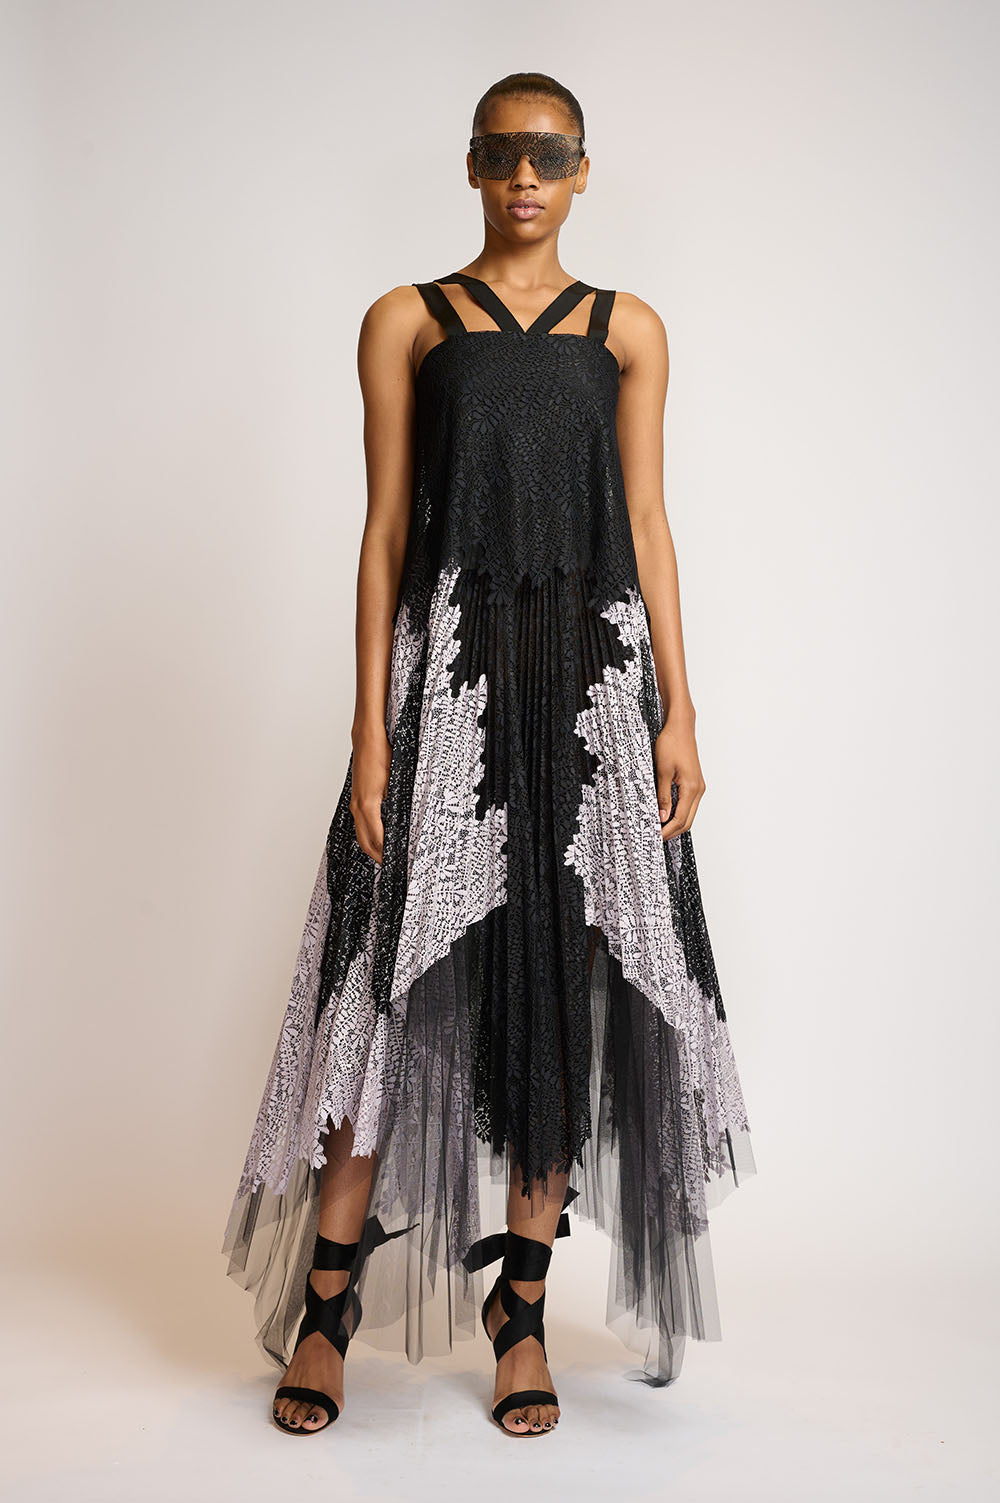 Onyx and Lilac Locust Leaf Applique dress with Asymentrical Pleated hemline 3